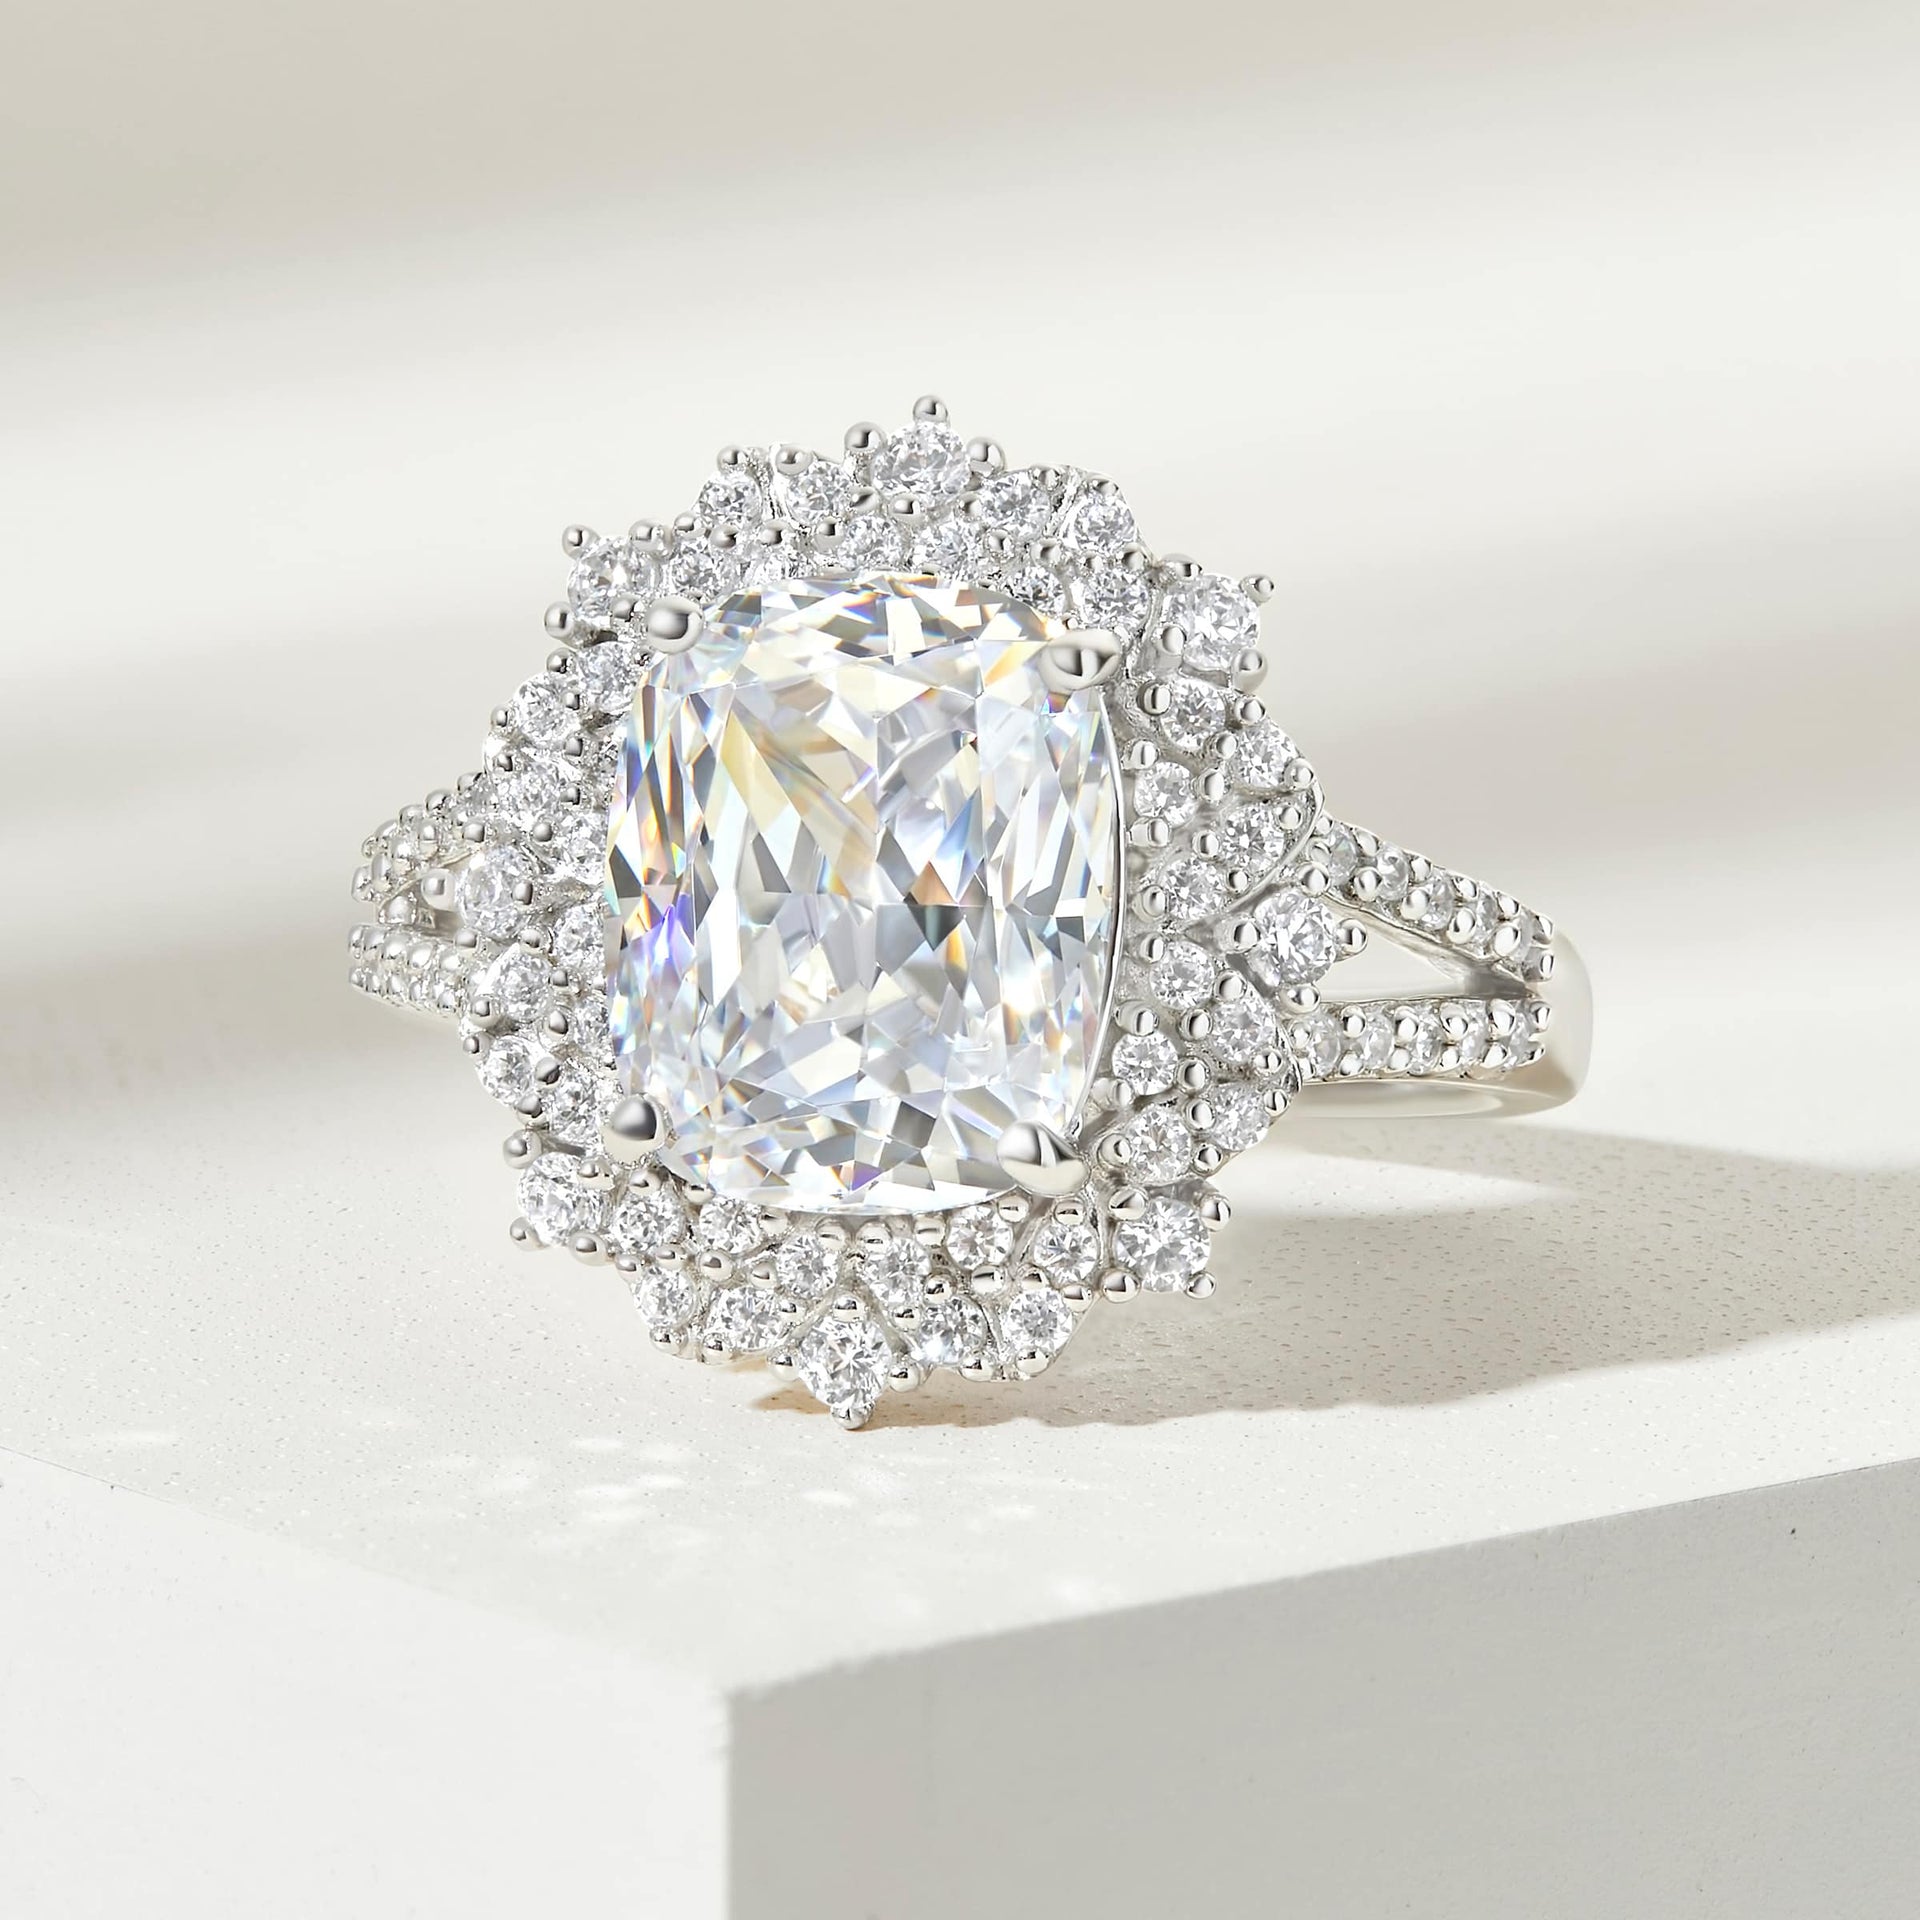 Close up shot of our vintage style 2.5 carat elongated cushion cut engagement ring